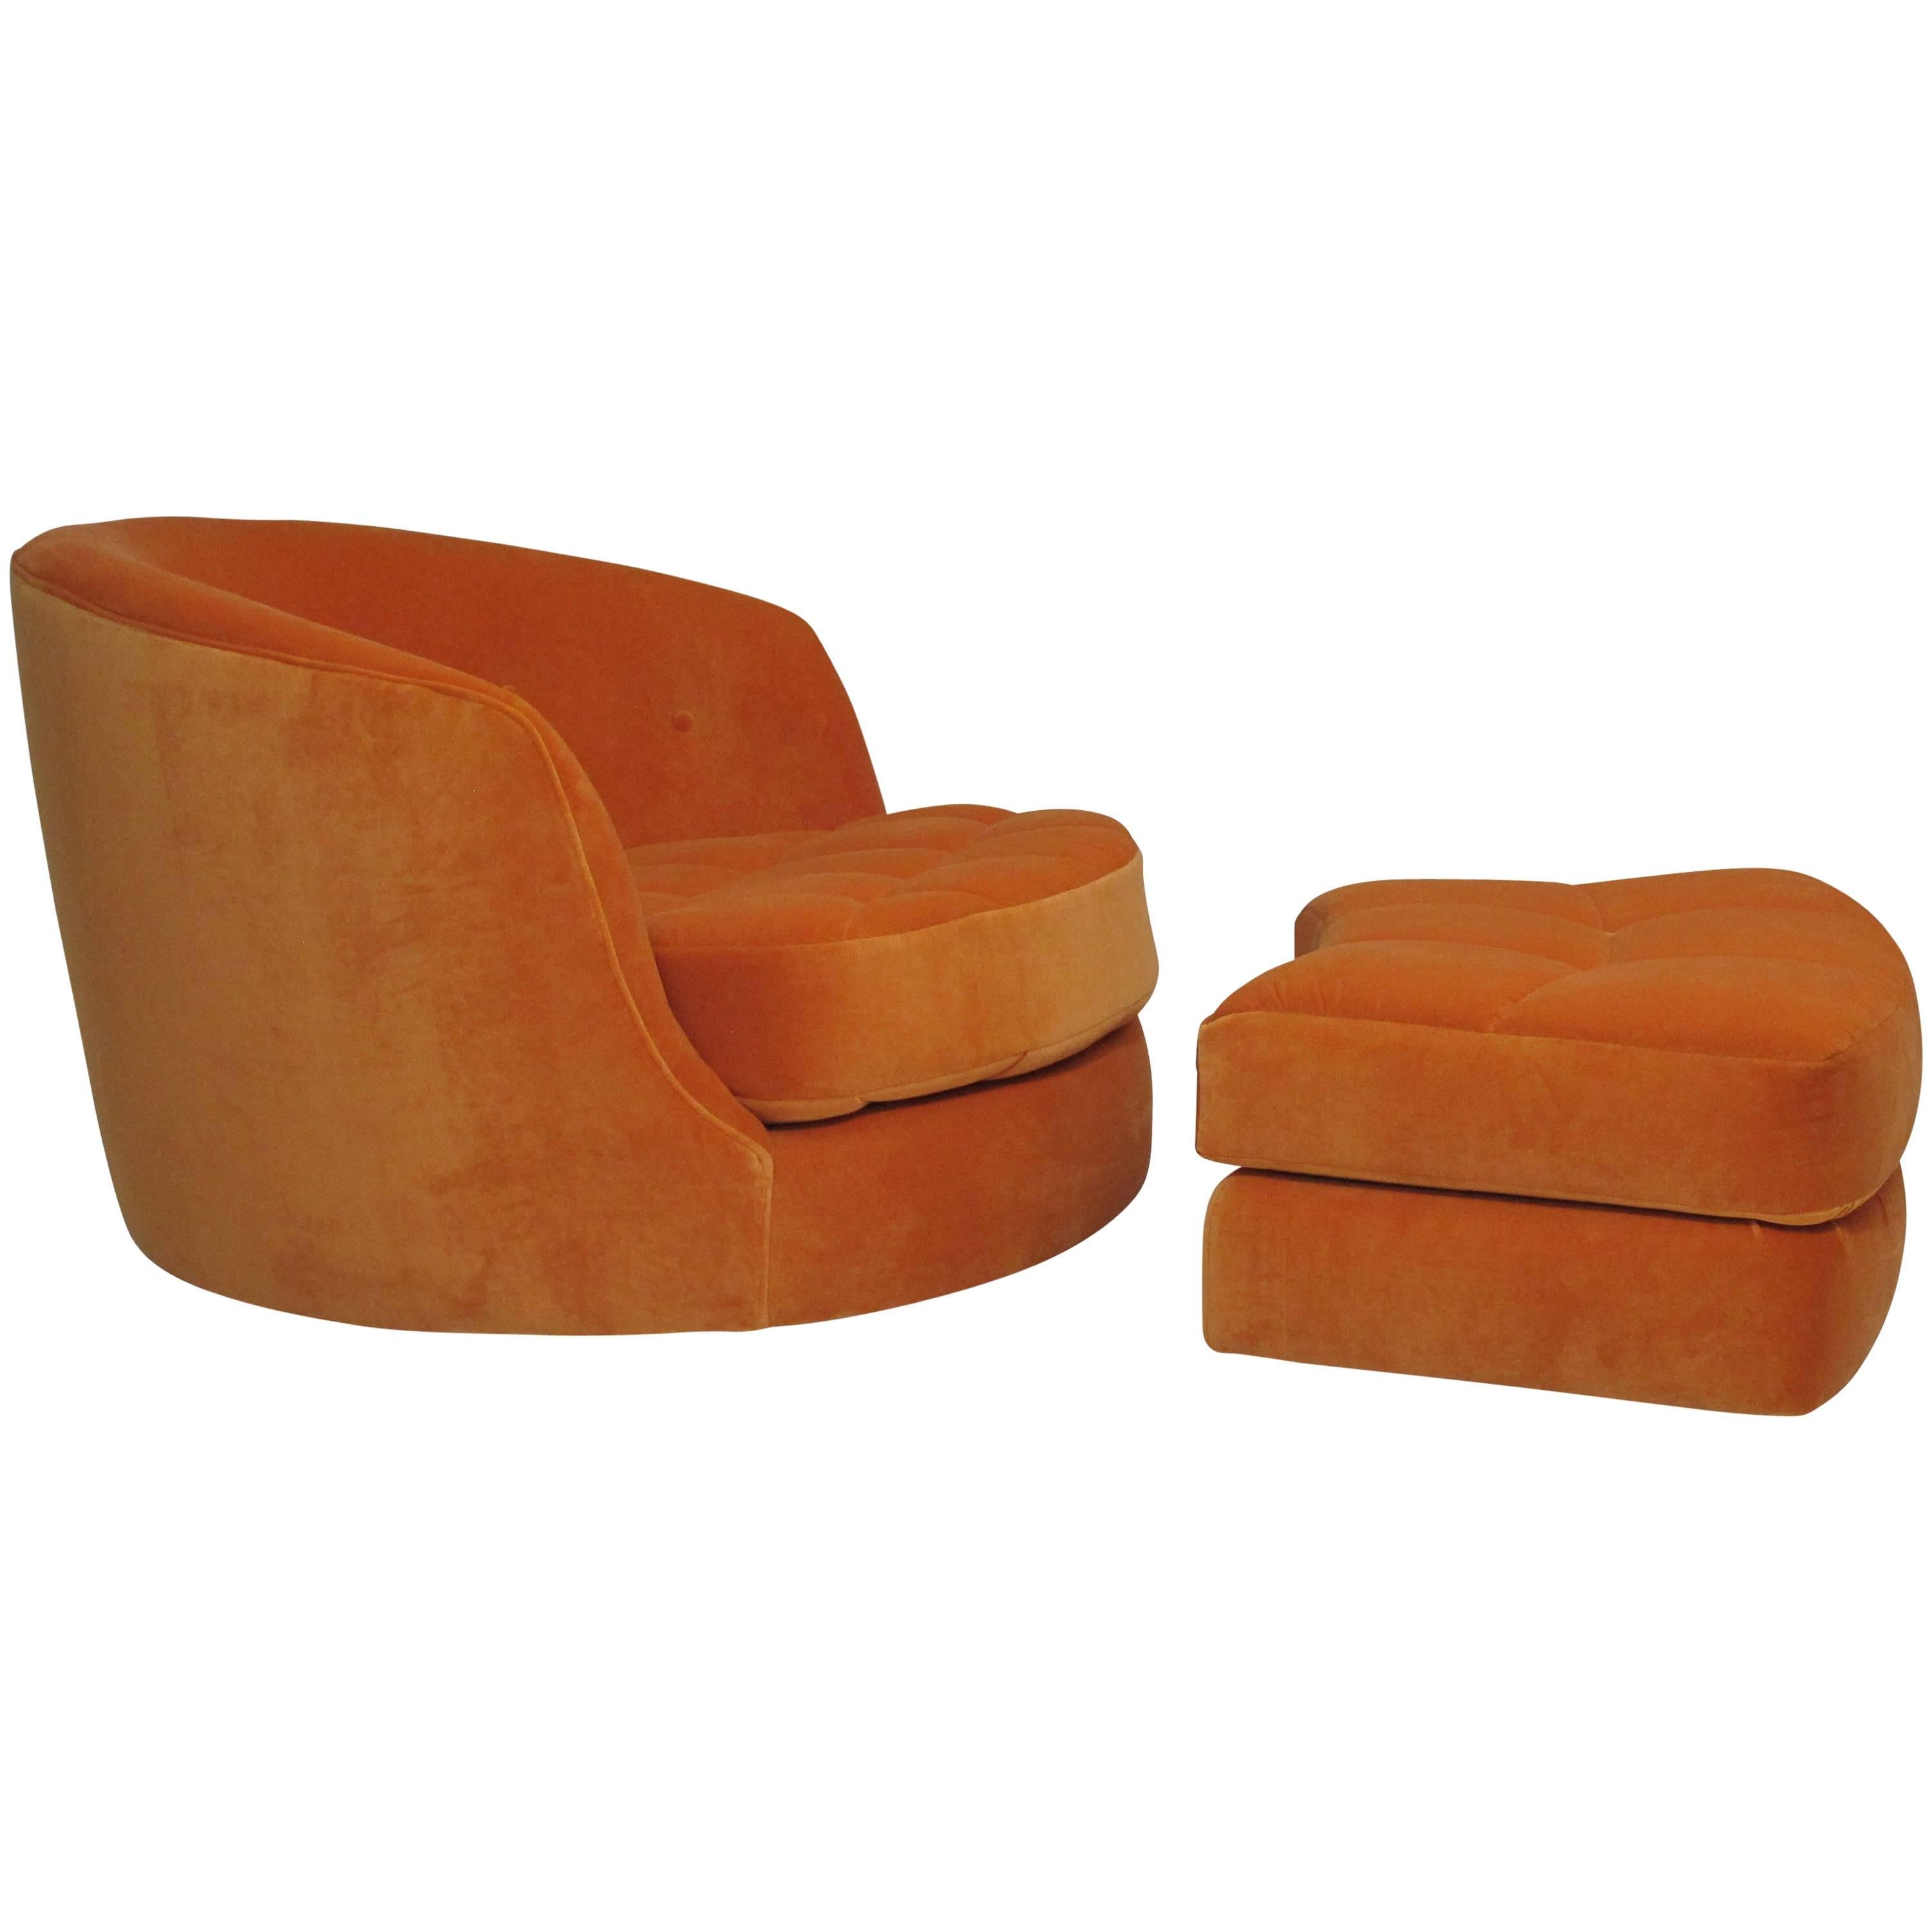 Licensed original swivel lounge chair designed by Milo Baughman for Thayer Coggin in 1965 available in COM. 
Requires 18 yards of fabric. Includes one, 24 x 24 inch pillow and one 18 x 18 inch pillow, plus ottoman with recessed casters. Ottoman